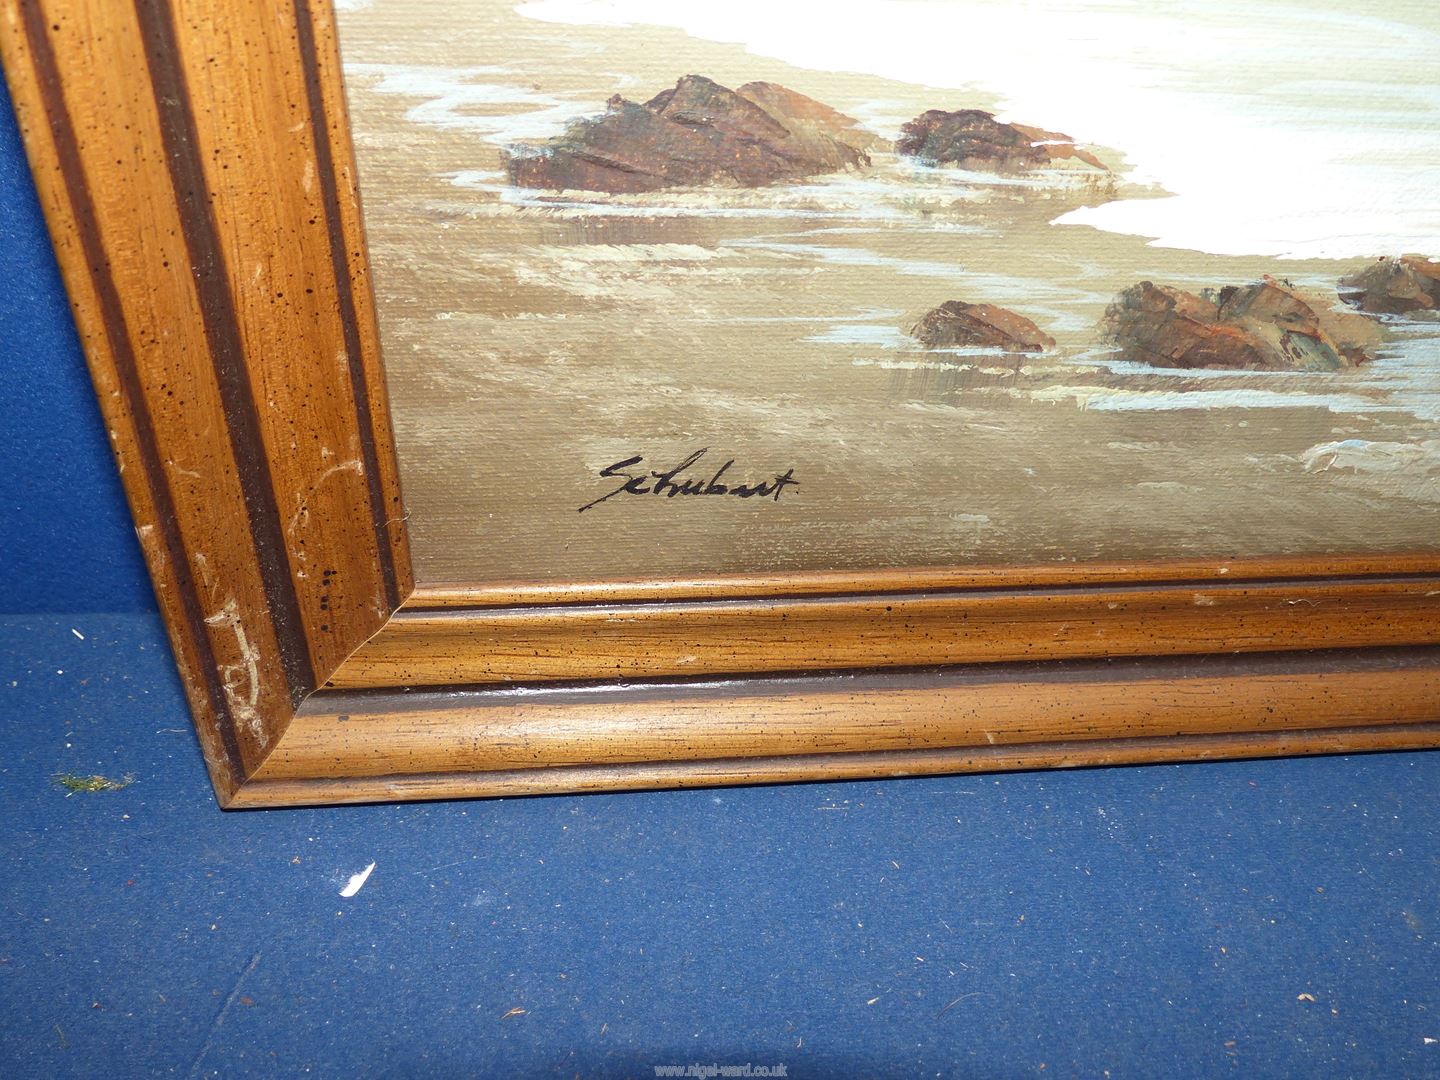 A framed Oil on canvas signed lower left 'Schubert' depicting a seascape at sunrise, - Image 2 of 2